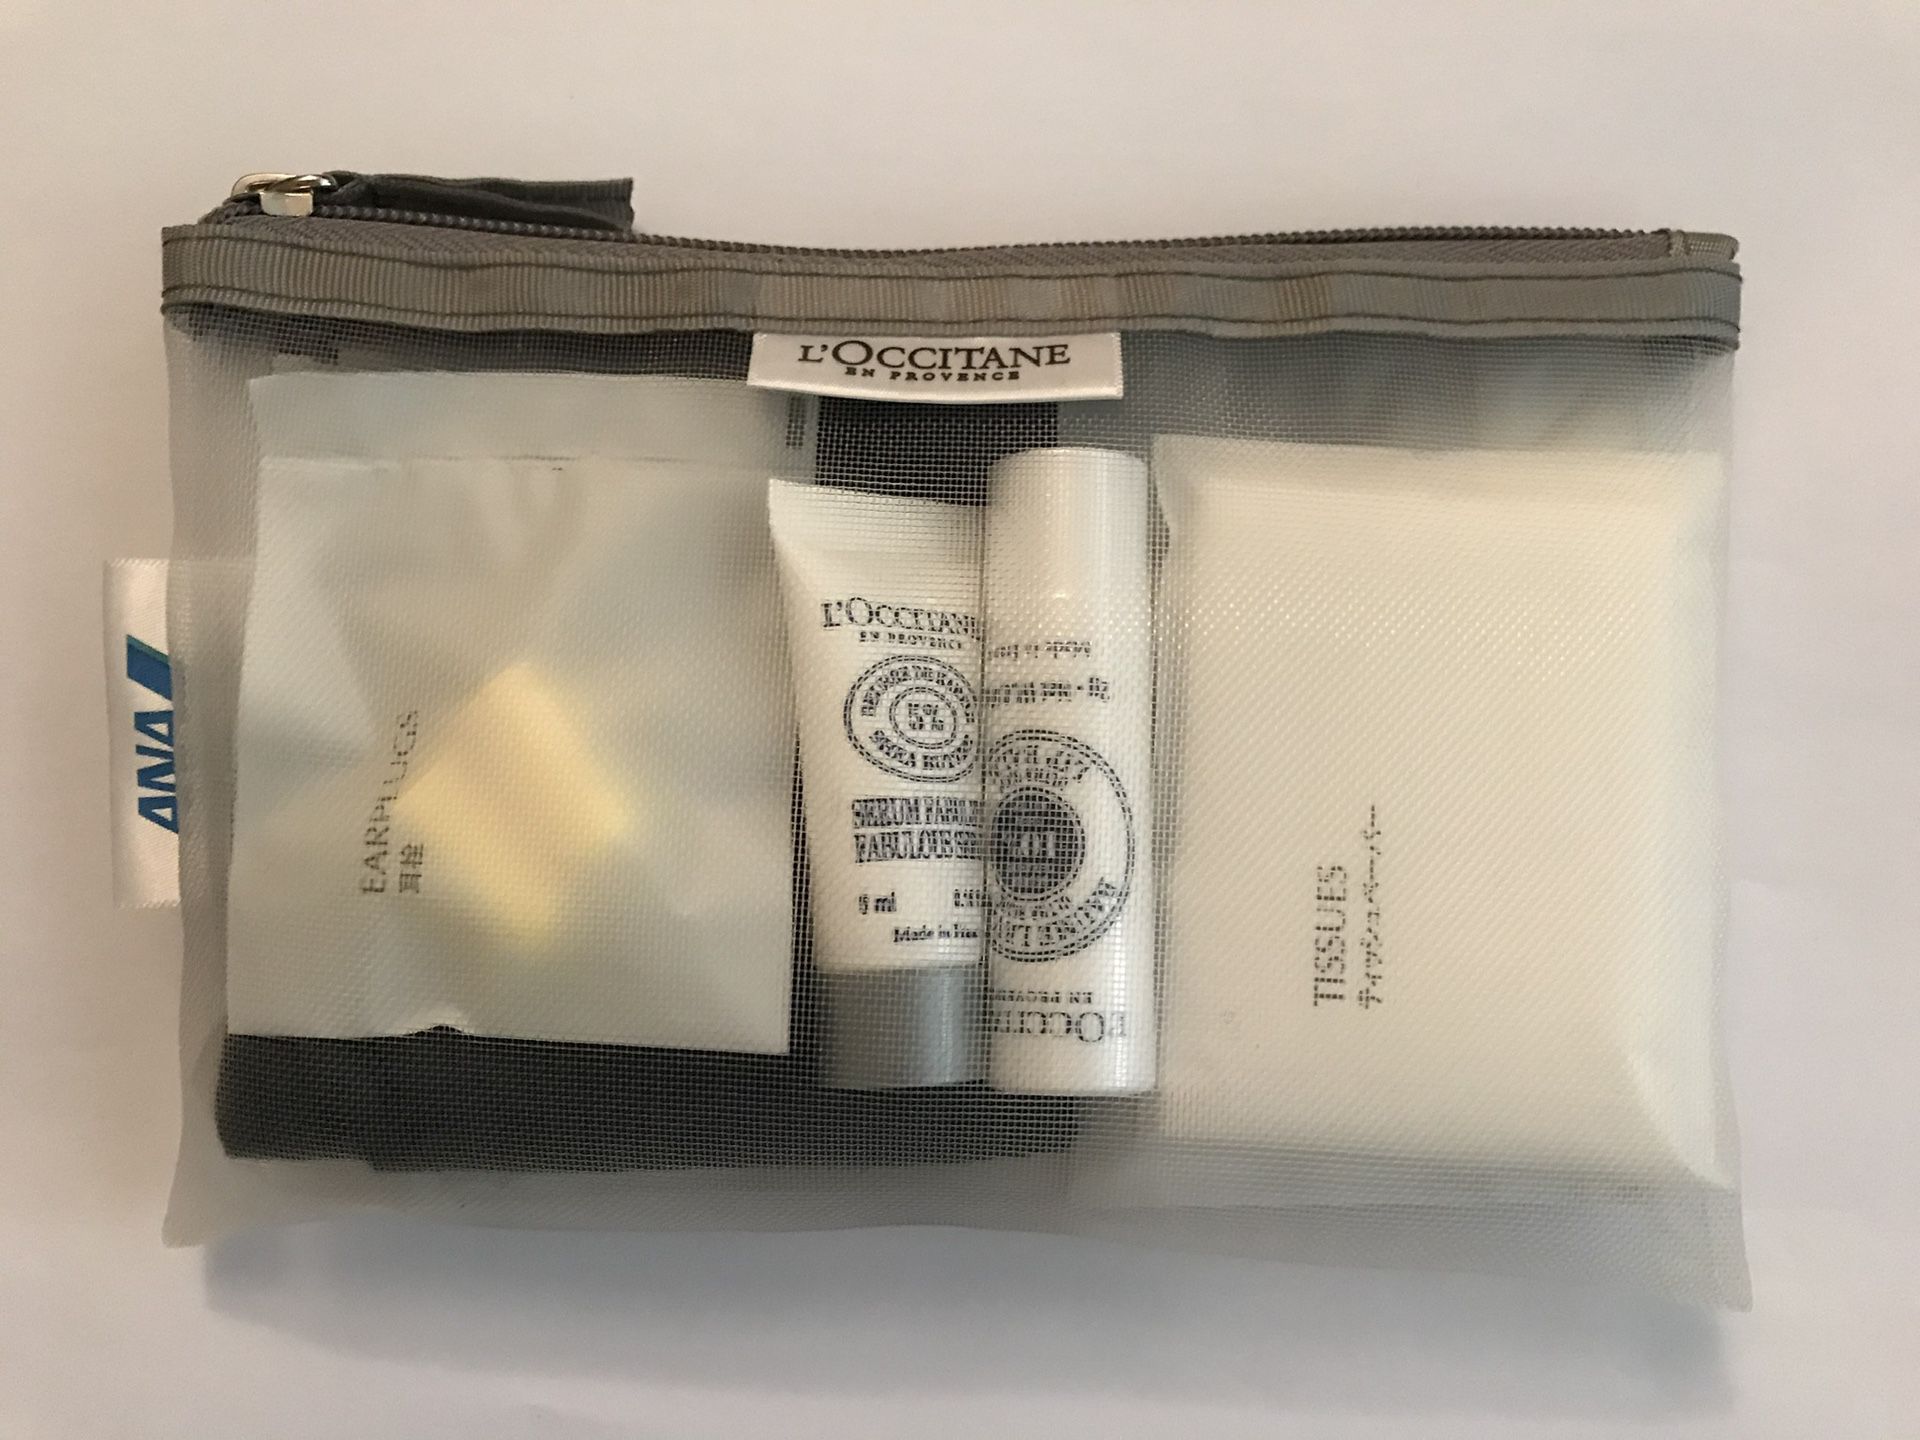 L'OCCITANE Travel Amenity Kit from ANA Business Class - White